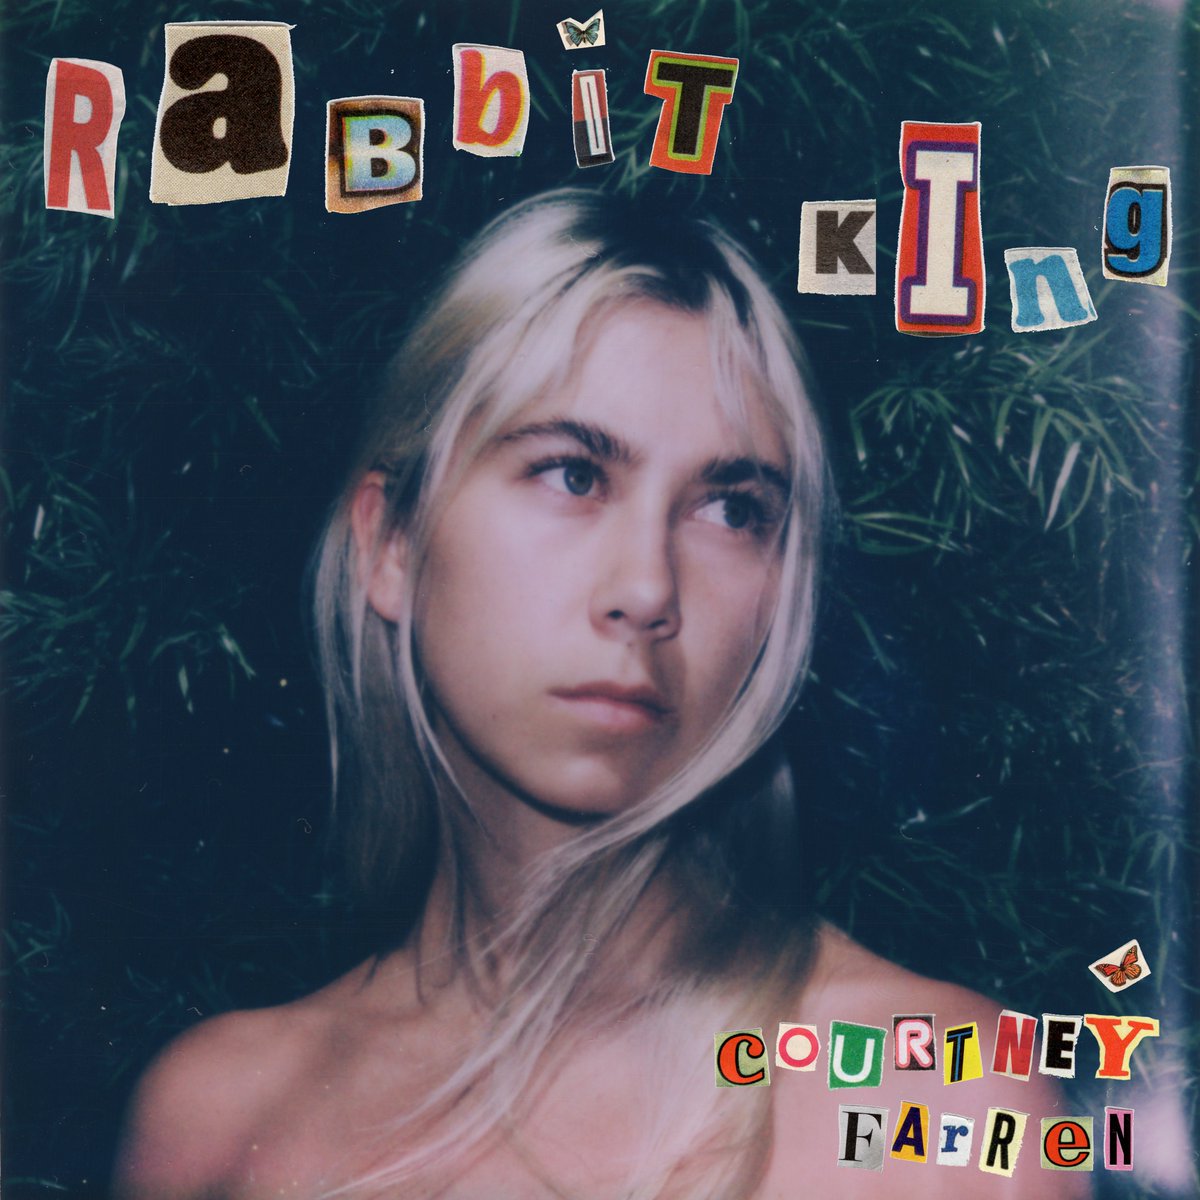 Check out the eclectic and emotive vibes on @CourtneyFarren’s new EP, Rabbit King: blackplastic.co.uk/alternative-el…